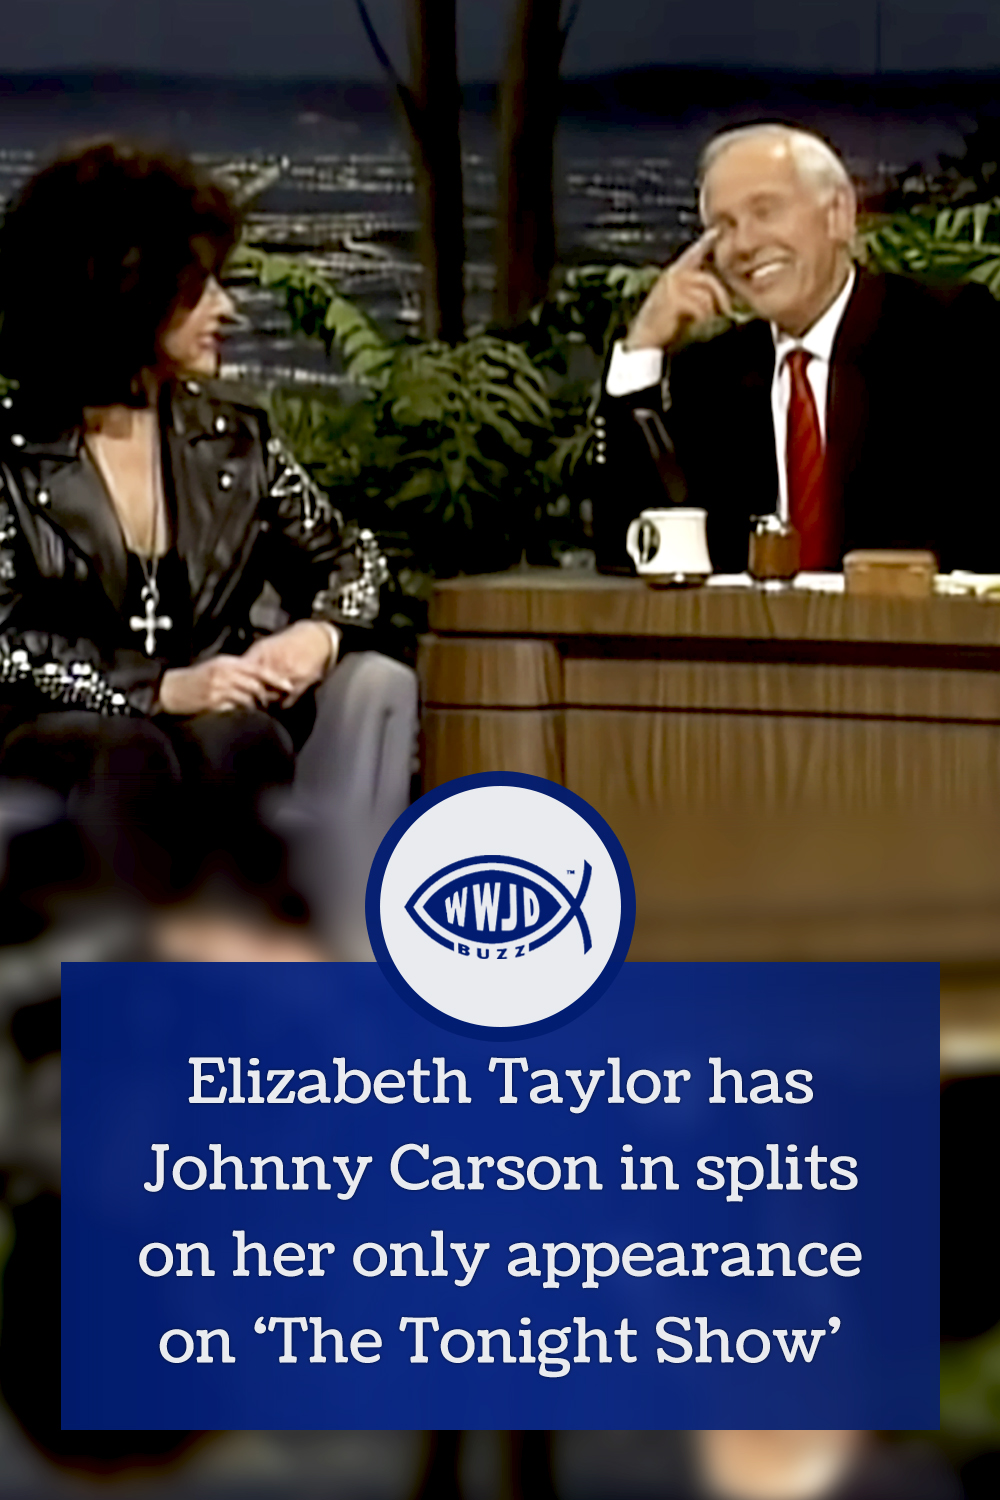 Elizabeth Taylor has Johnny Carson in splits on her only appearance on \'The Tonight Show\'